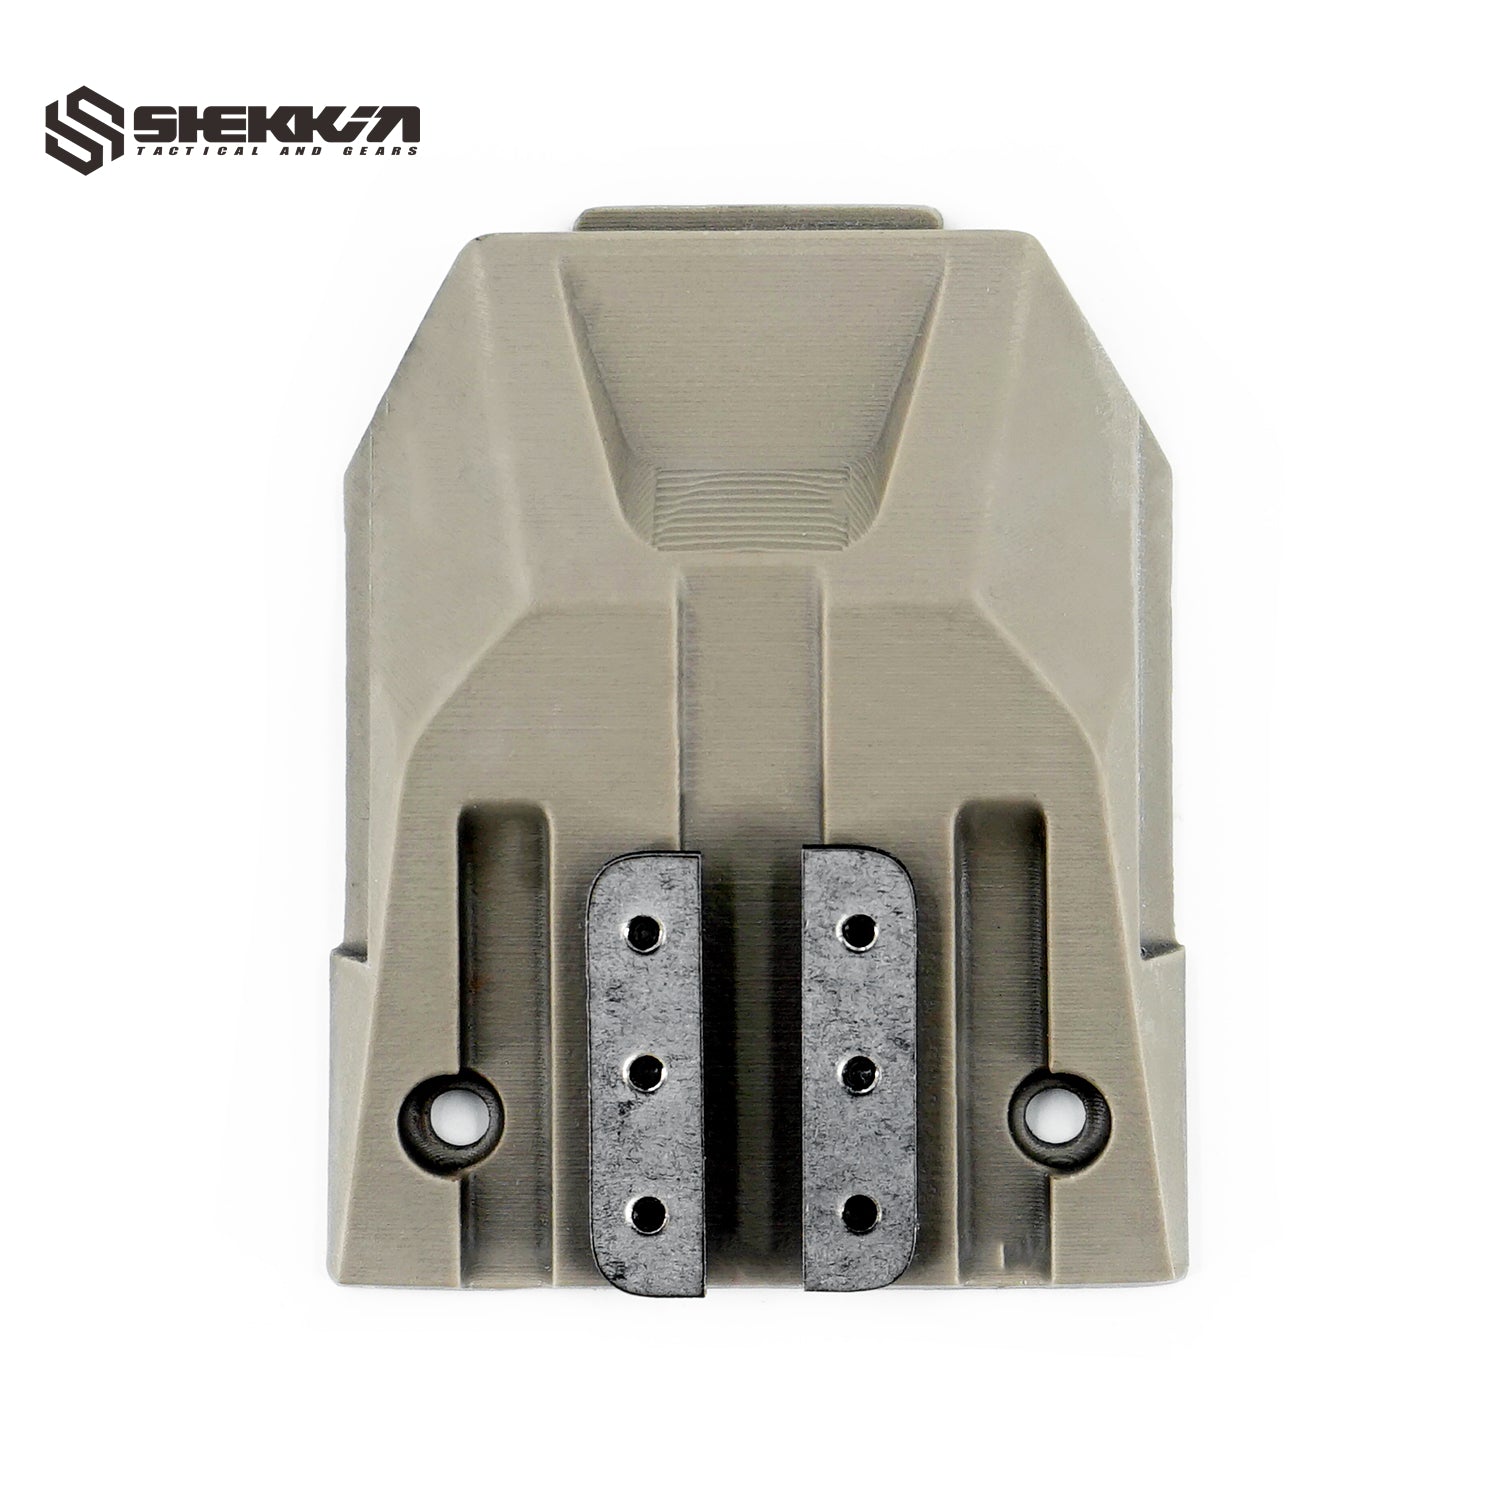 MBS Style Adapter insert for wilcox GSGM - Shekkin Gears